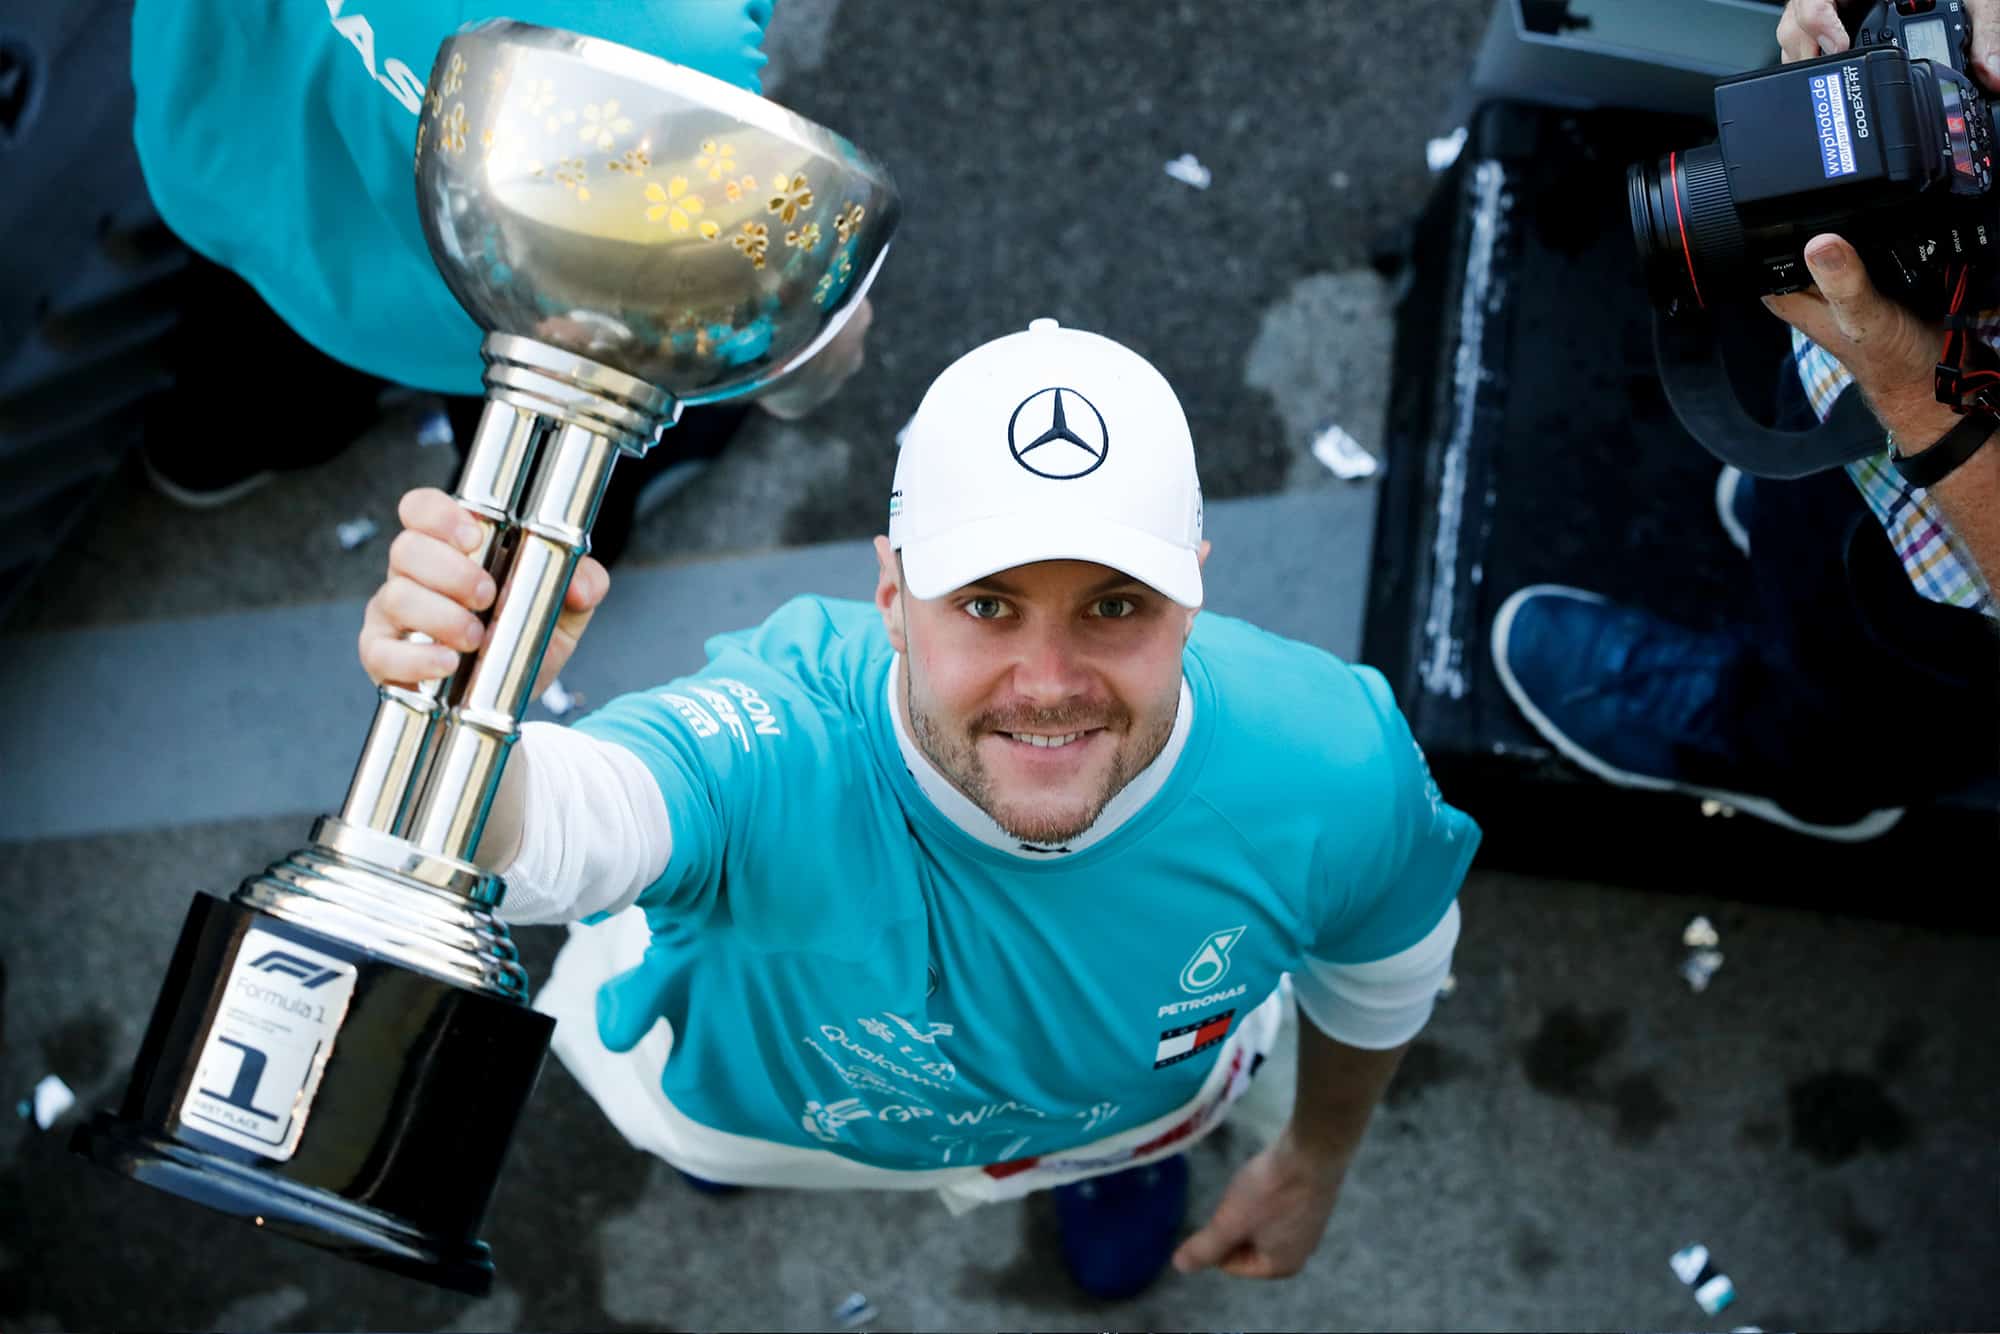 Valtteri Bottas holds his winning trophy from the 2019 Japanese Grand Prix